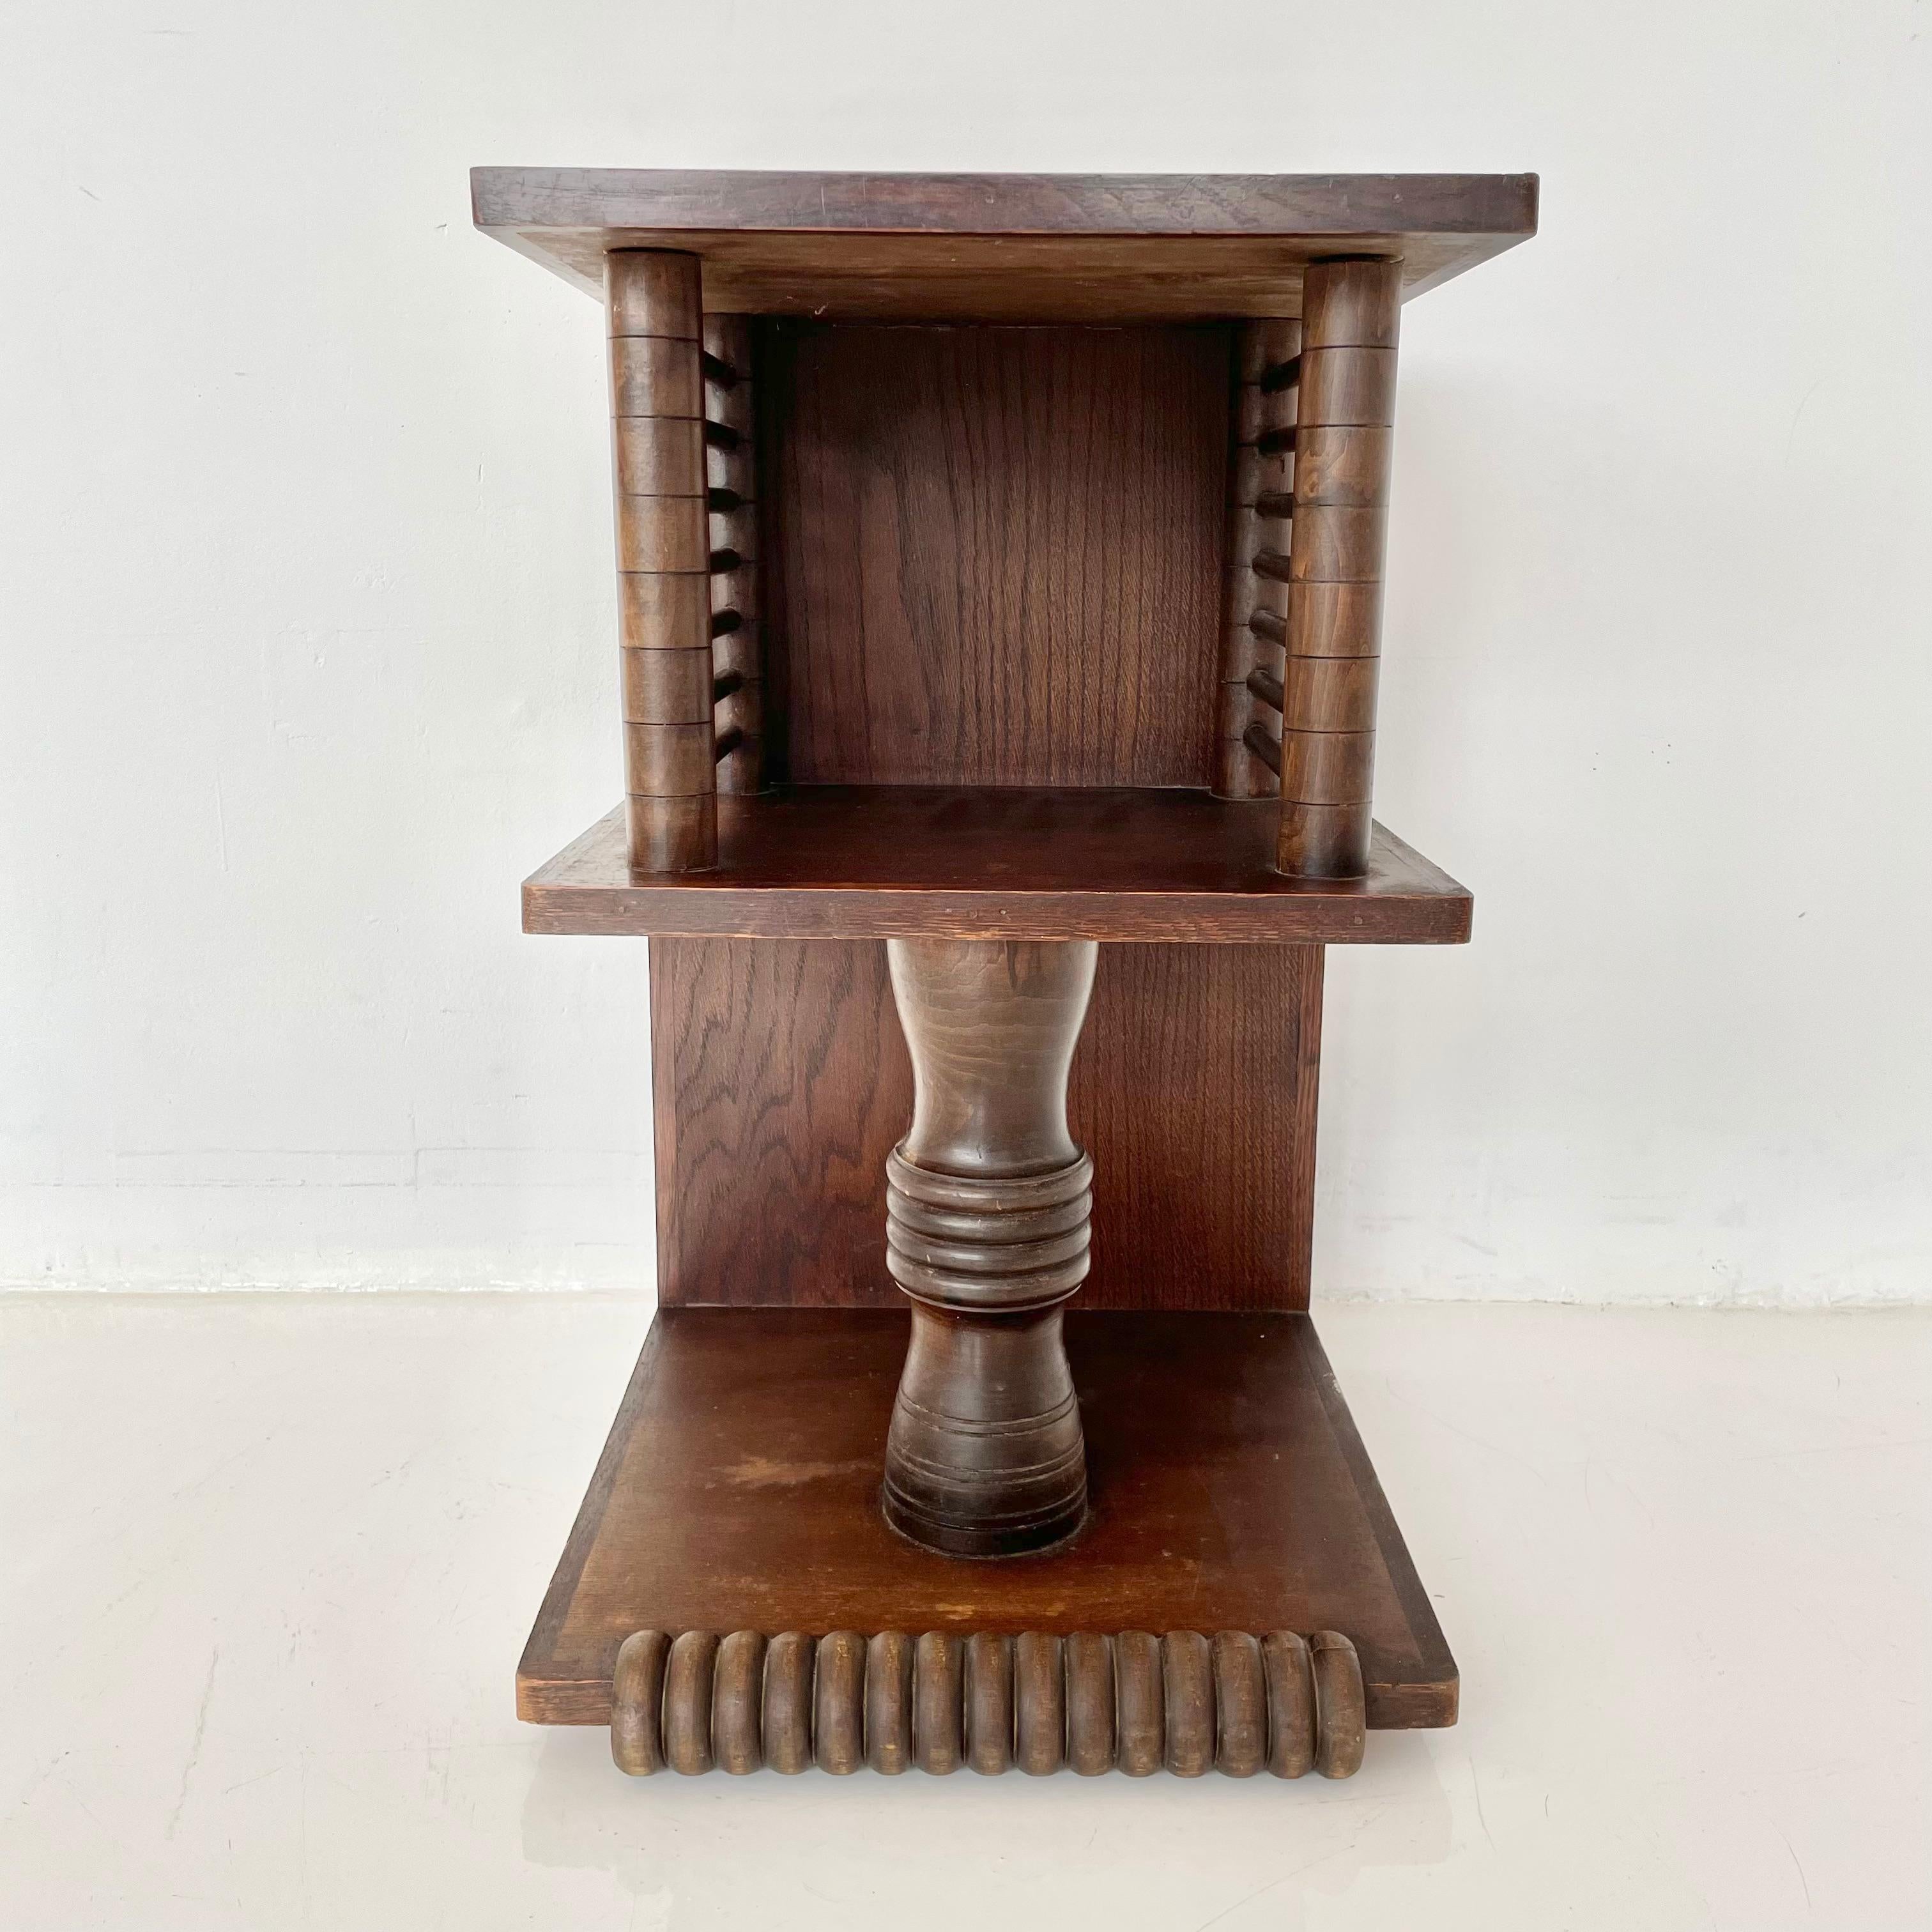 Charles Dudouyt (1885-1946) French end table, circa 1930.
Influenced heavily by African art, these richly carved tables mark an aesthetic exodus form Art Deco to the bold abstract forms of Picasso and the modern movement.

A prominent figure in